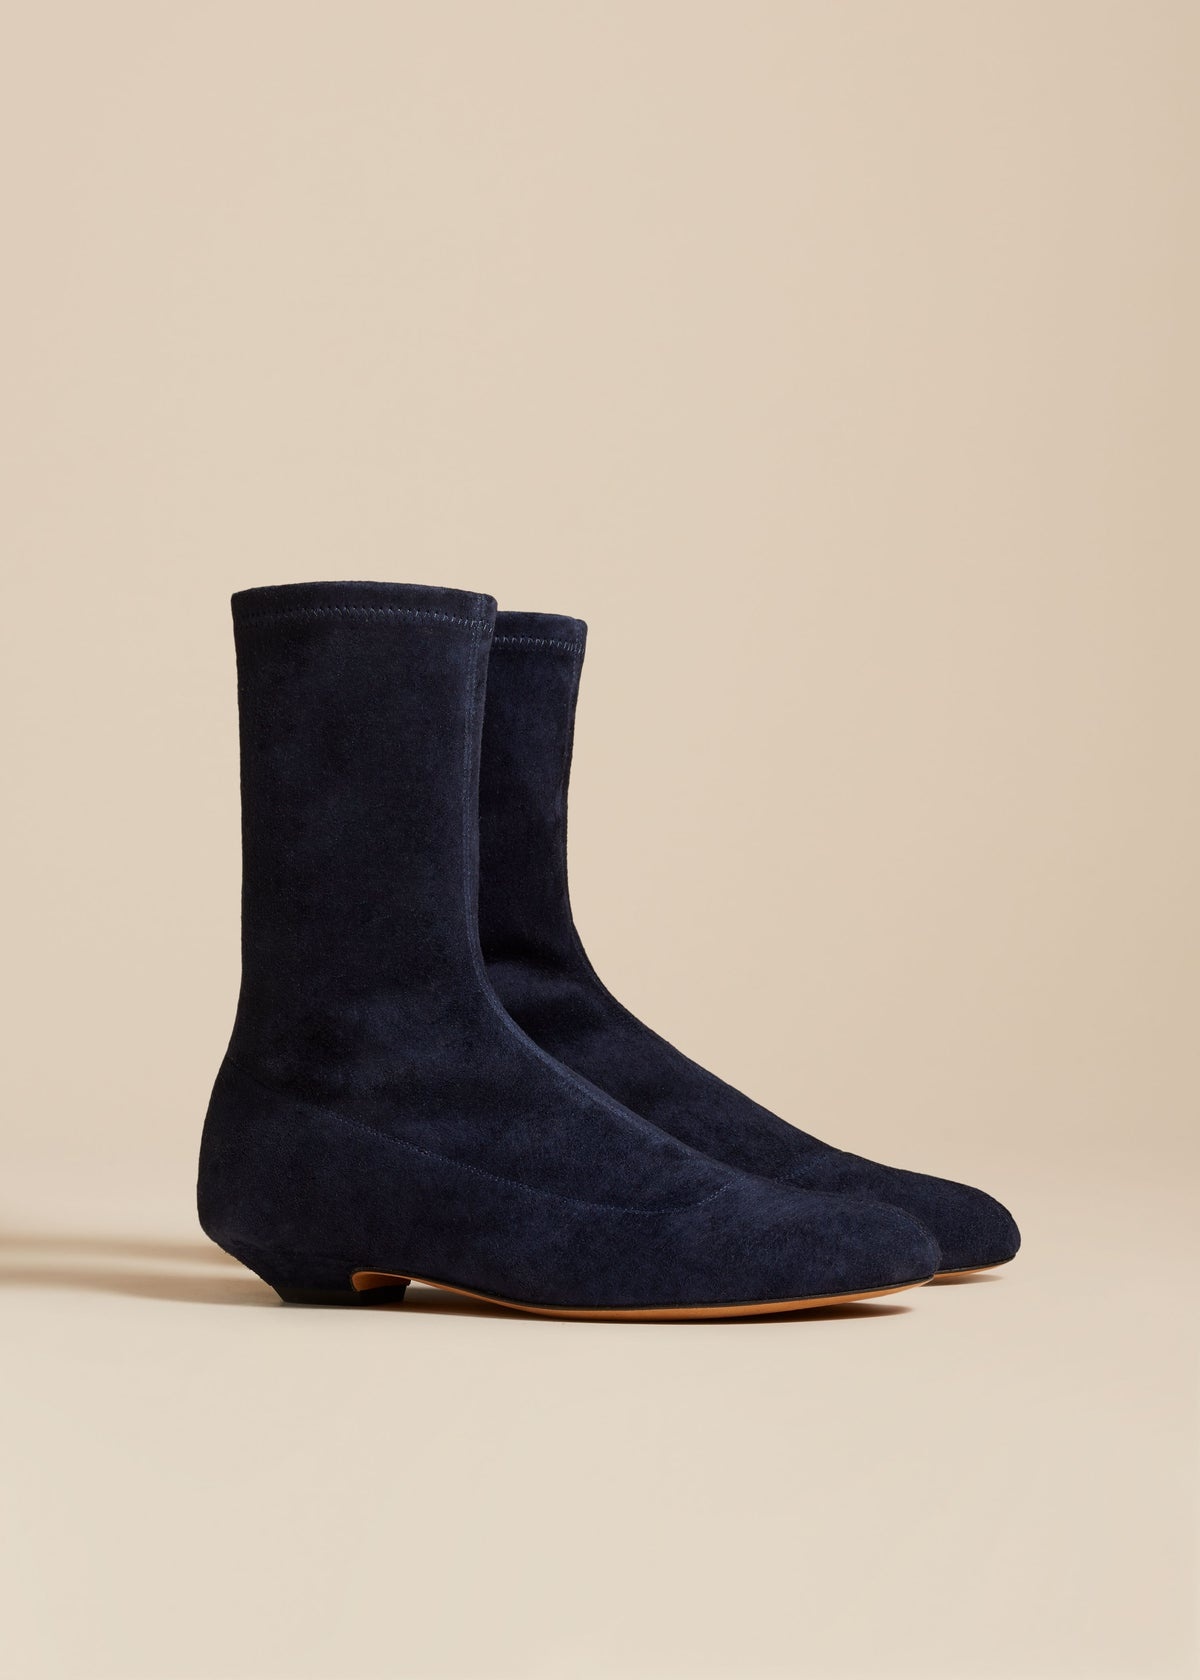 The Apollo Ankle Boot in Midnight Suede - 2